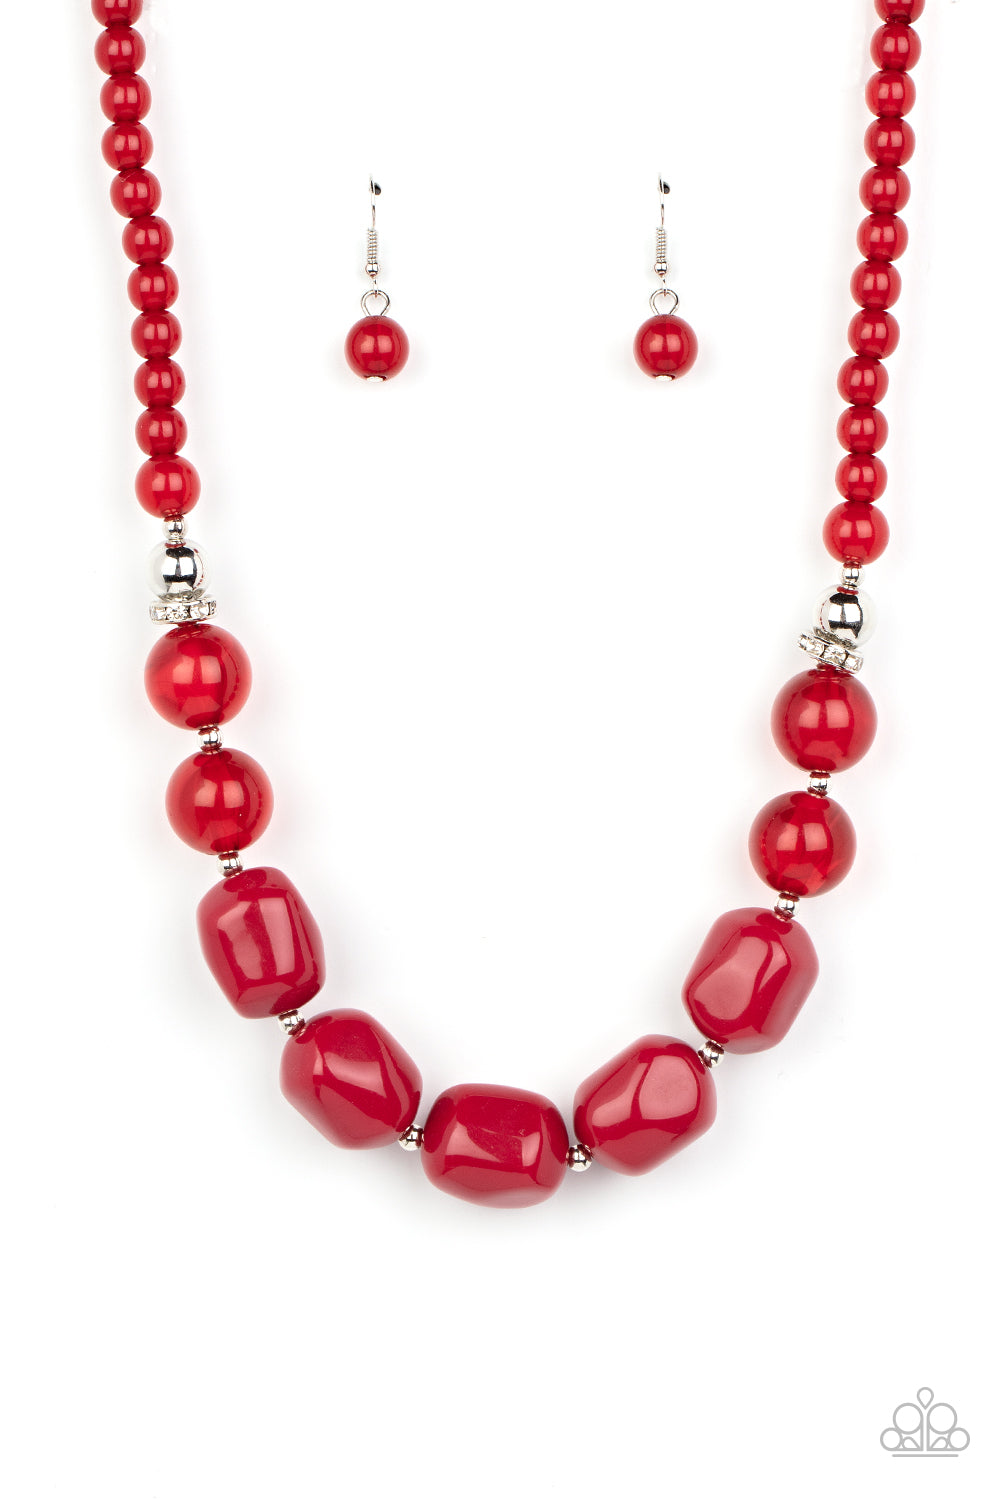 Accented with bright silver beads and glittery rhinestone accents, a row of oversized subtly faceted red beads gives way to marbled red beads that transition to smaller opaque red beads as they make their way around the collar for a modern fashion. Features an adjustable clasp closure.  Sold as one individual necklace. Includes one pair of matching earrings.